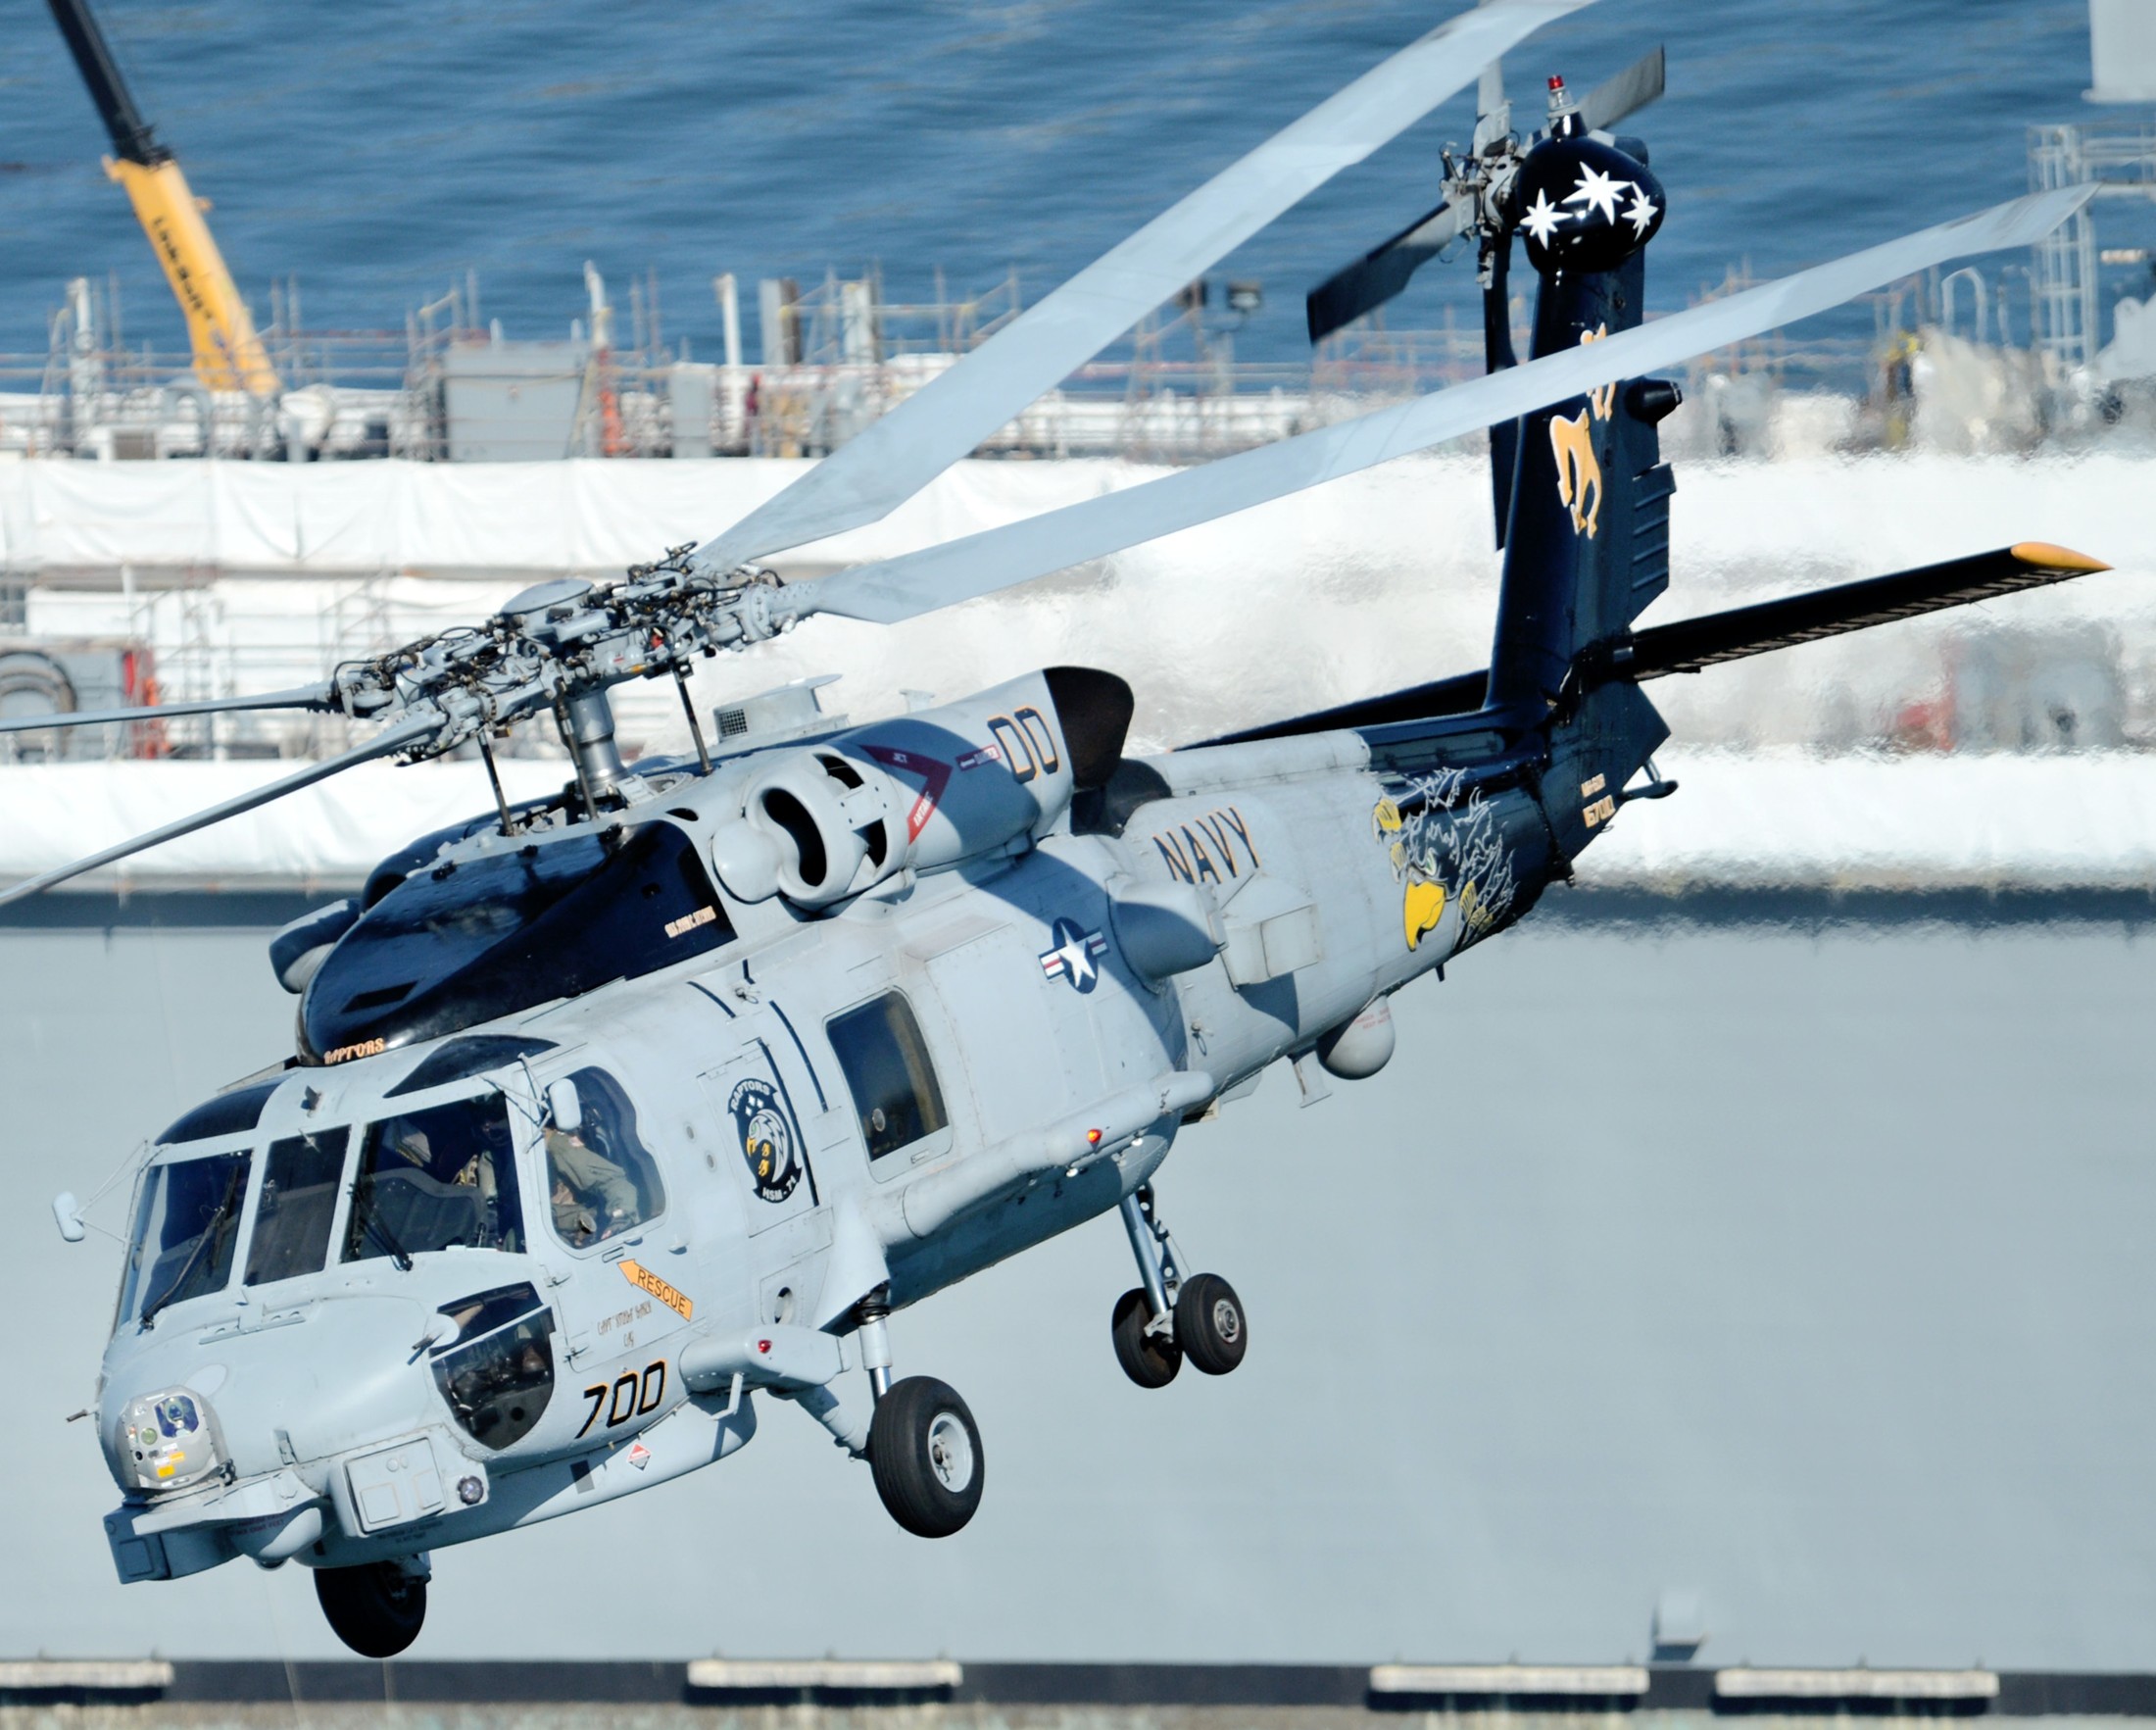 hsm-71 raptors helicopter maritime strike squadron mh-60r seahawk navy 2014 51